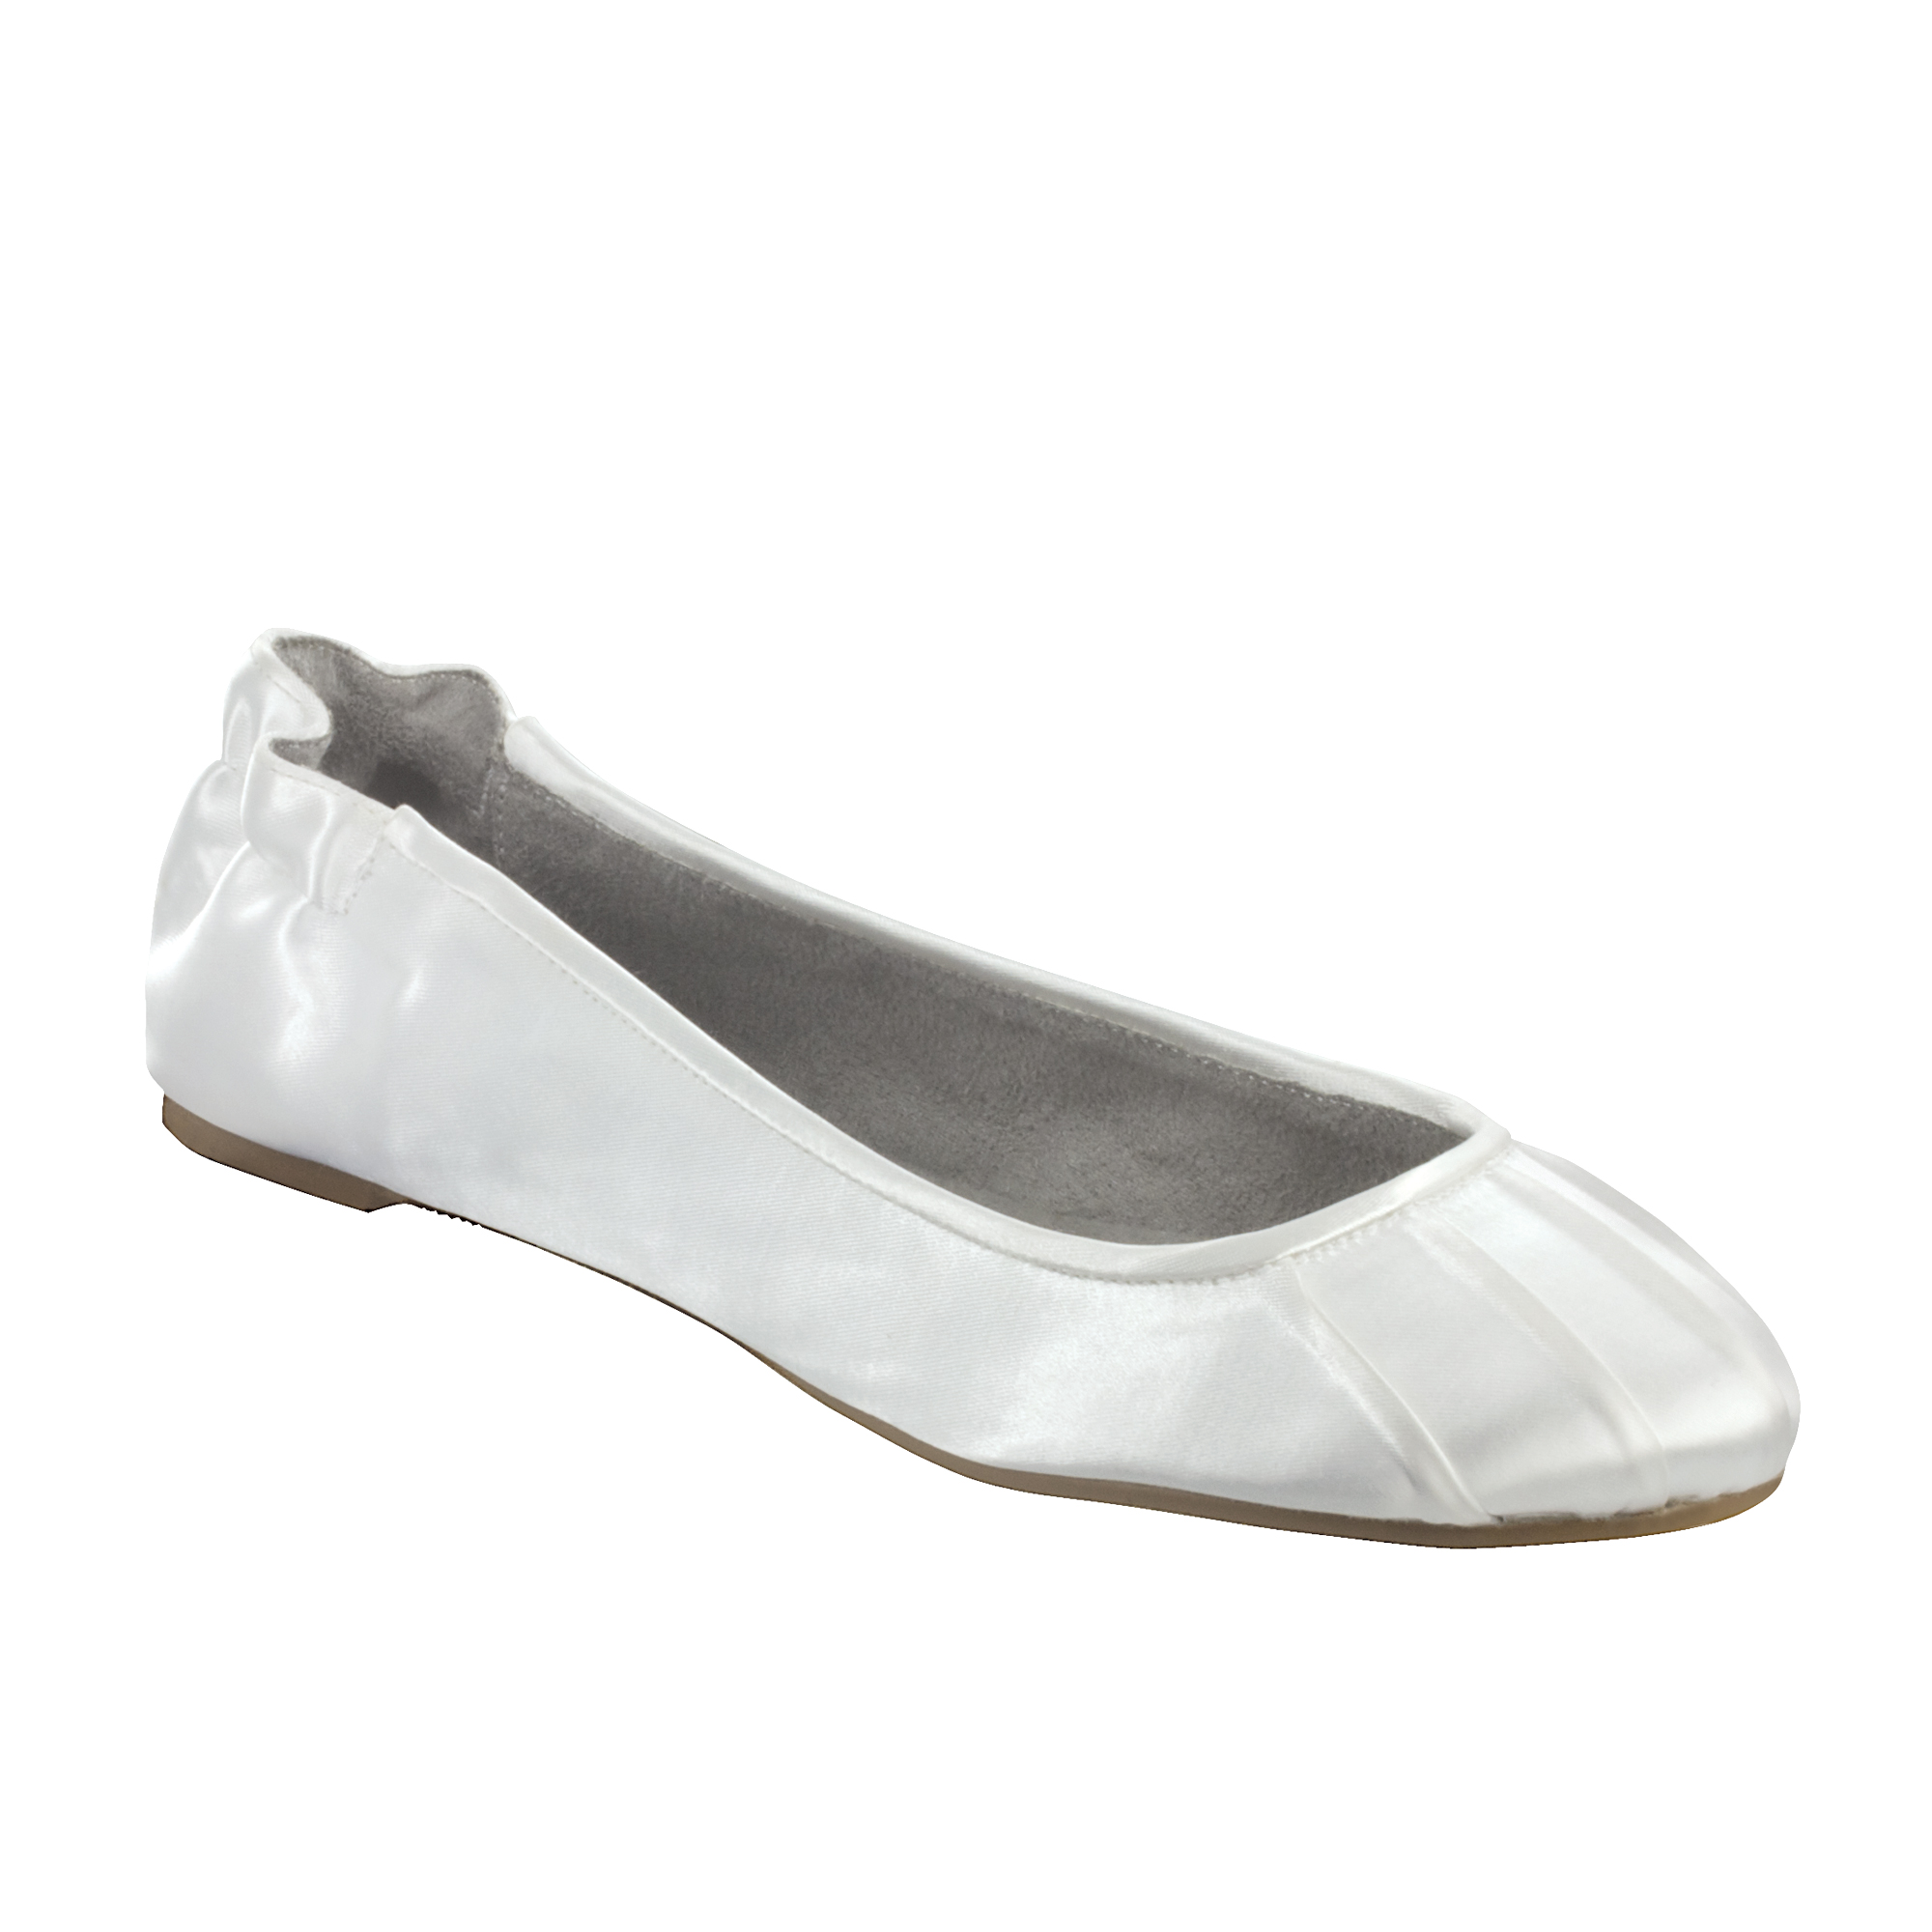 DYEABLES BELLA WHITE SATIN FLAT - Dyeable Shoe Store